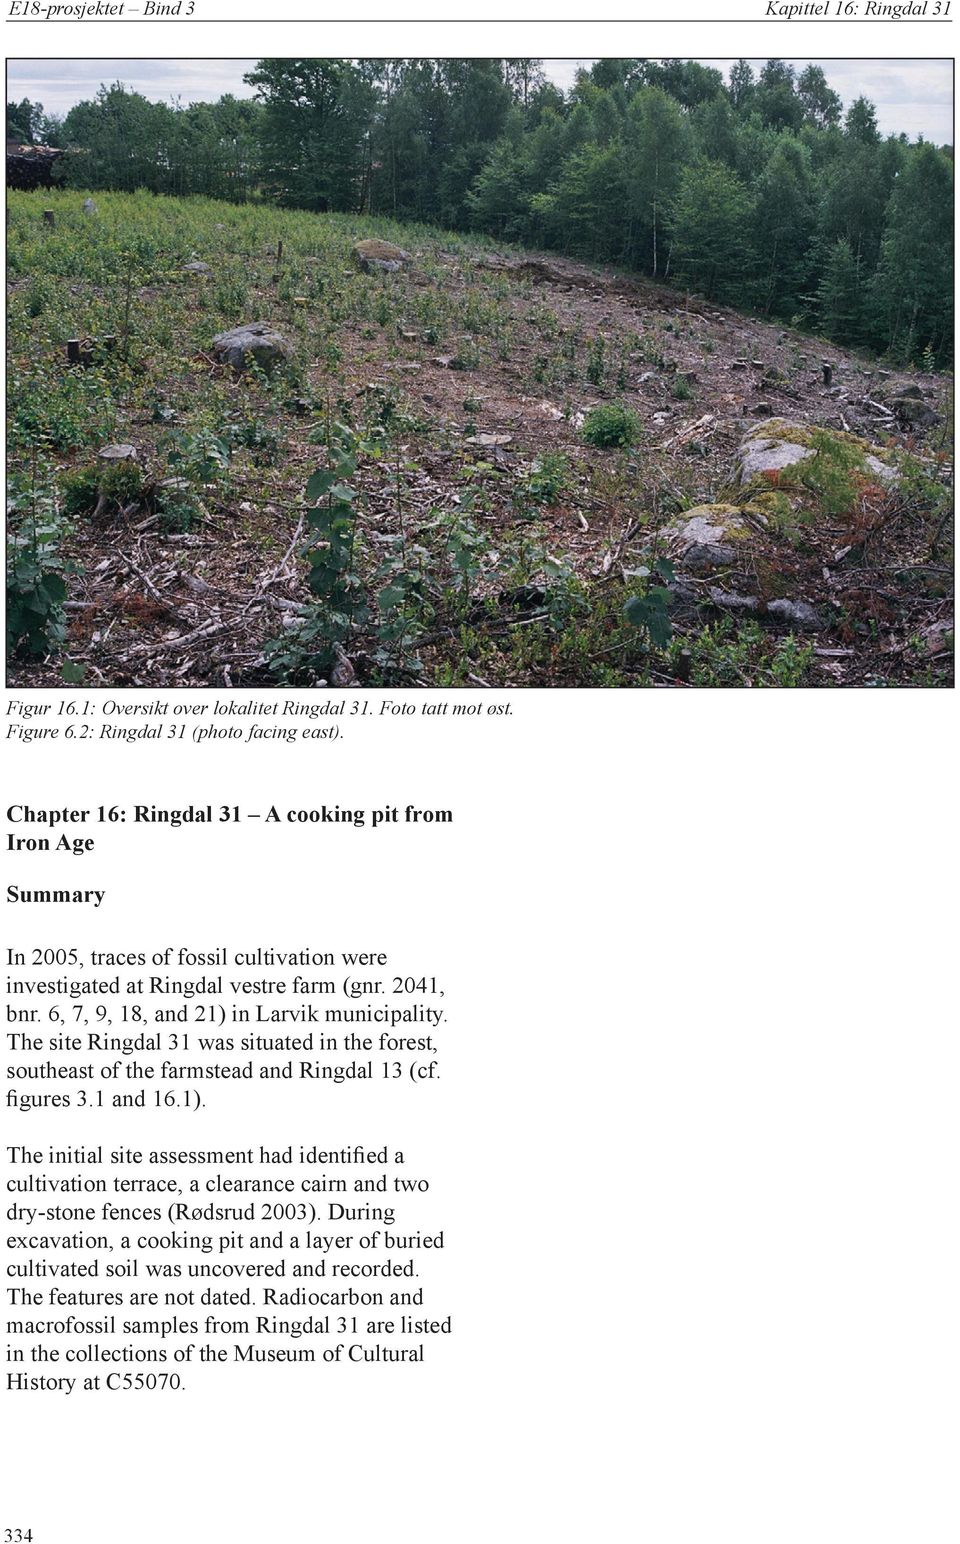 The site Ringdal 31 was situated in the forest, southeast of the farmstead and Ringdal 13 (cf. ﬁgures 3.1 and 16.1).